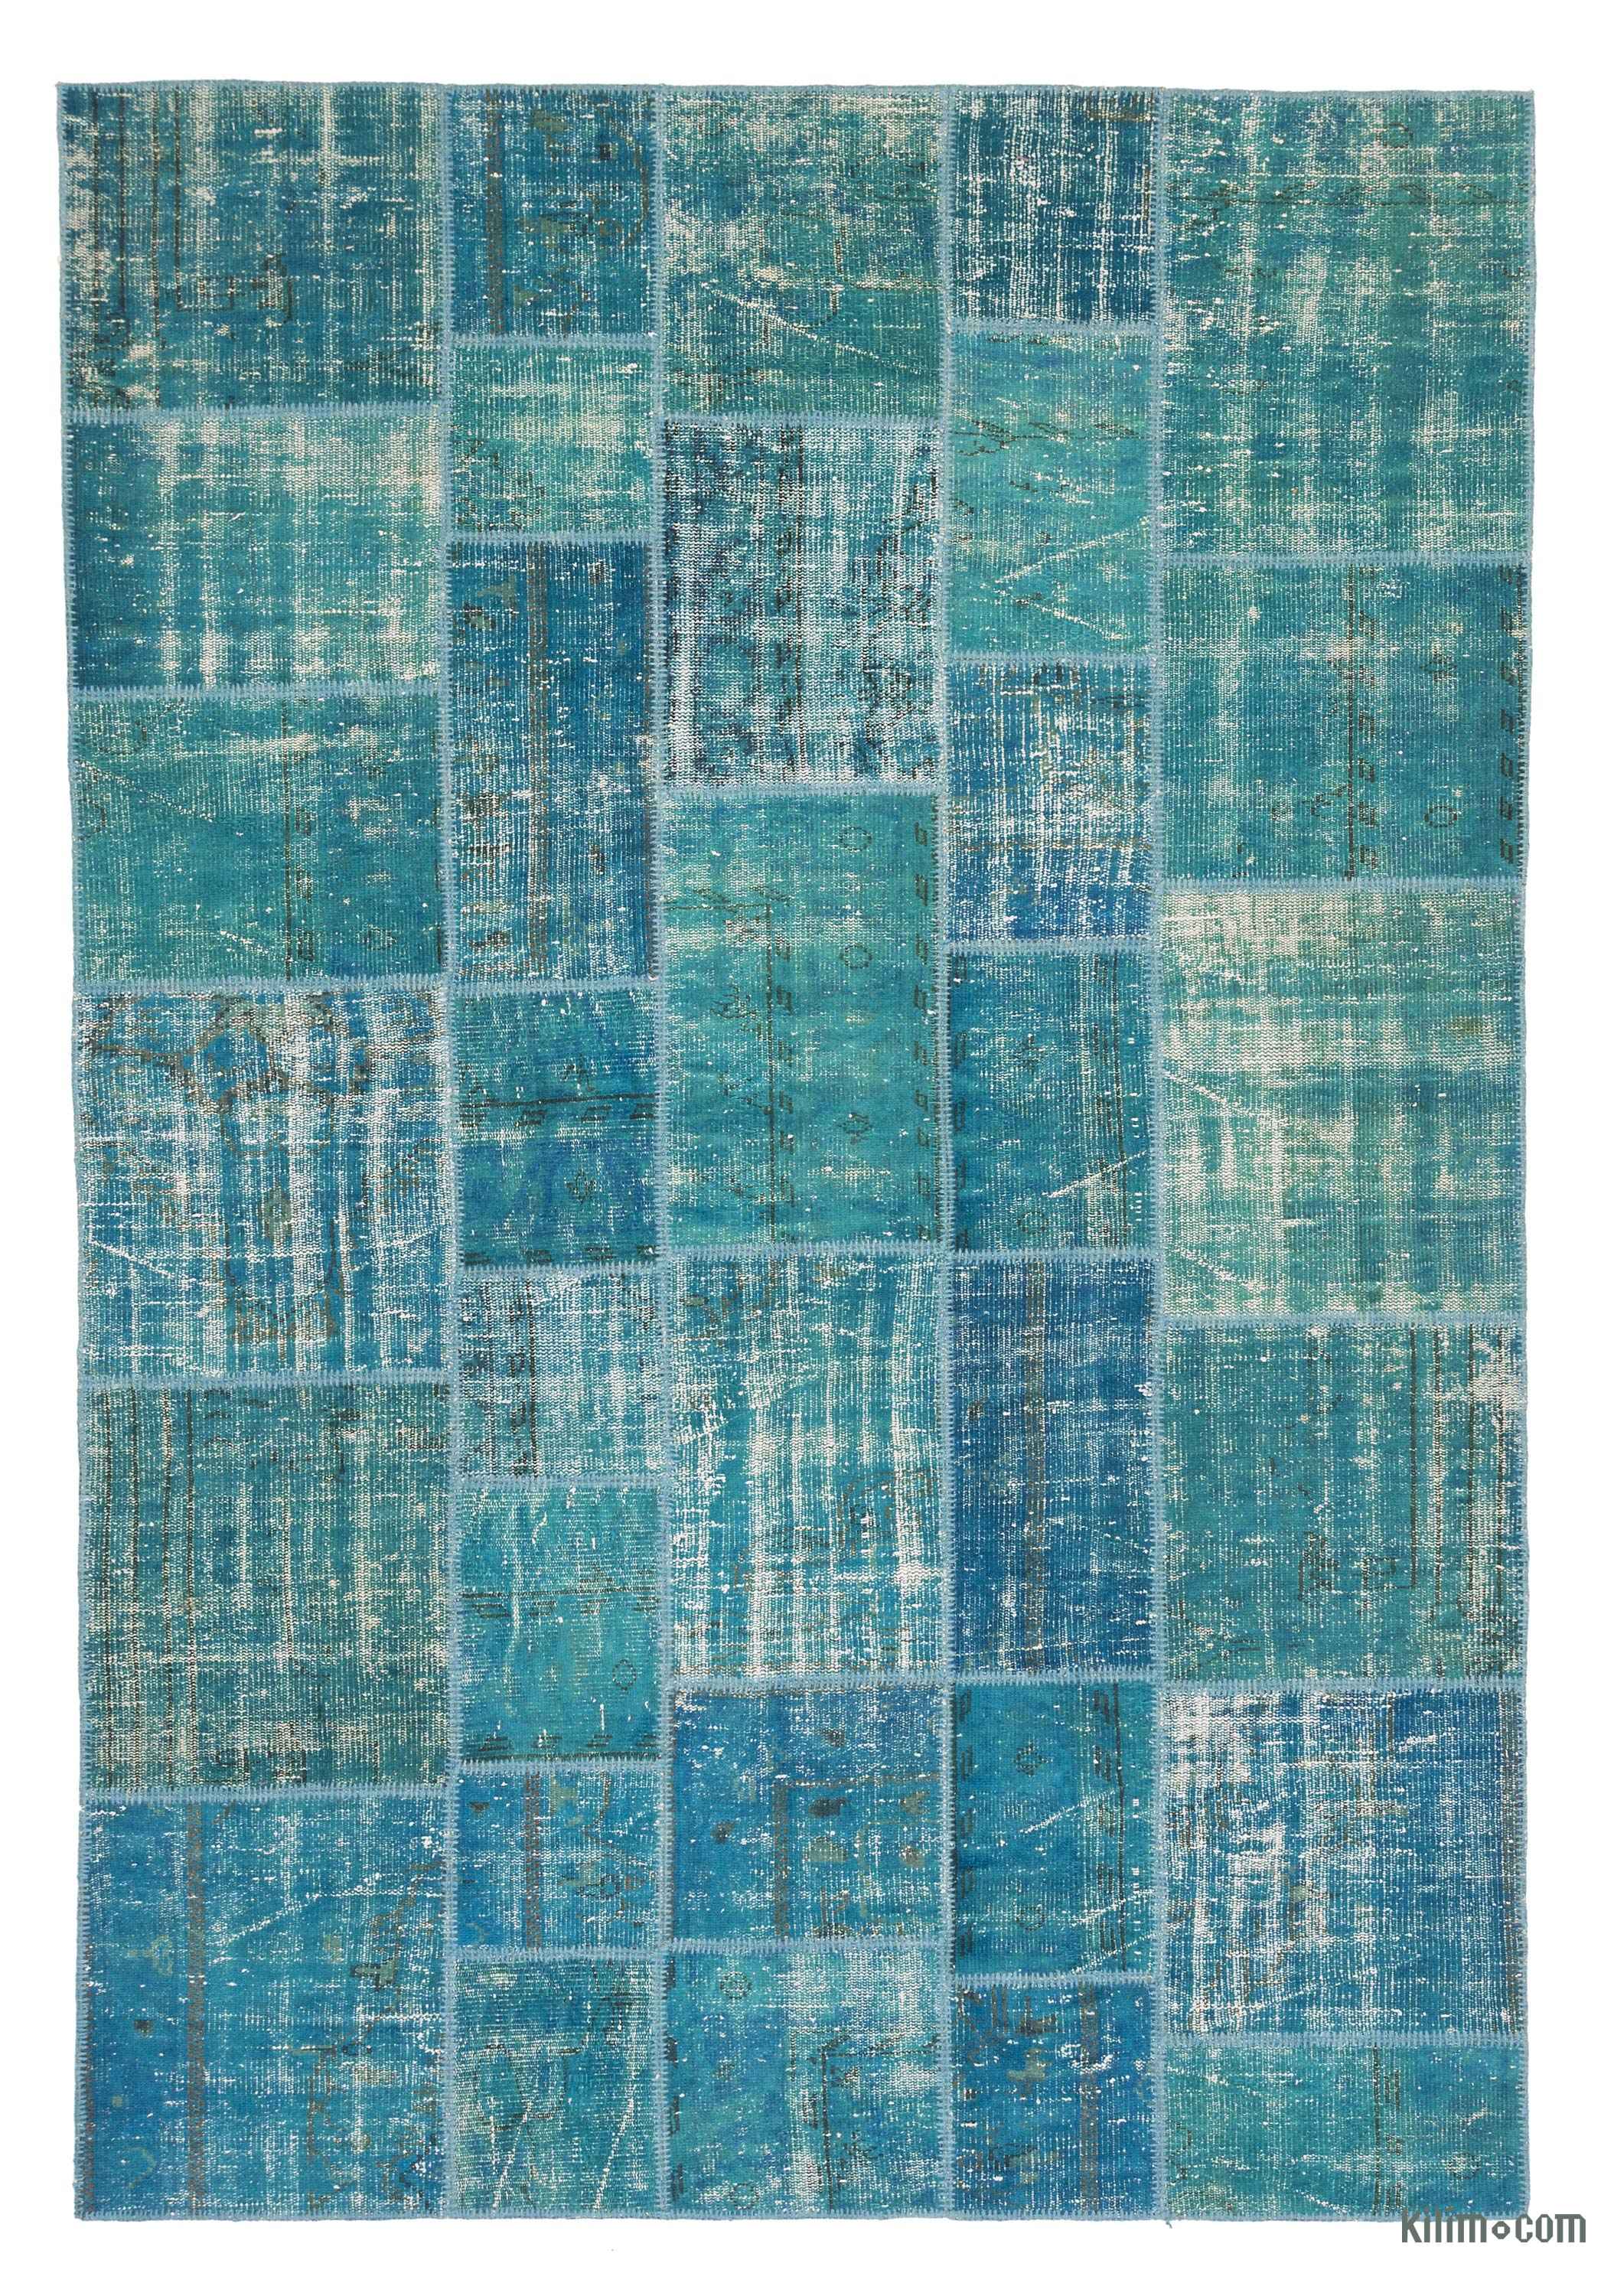 Shop Modern Rugs, Contemporary Carpets and Runners - Handwoven, Authentic